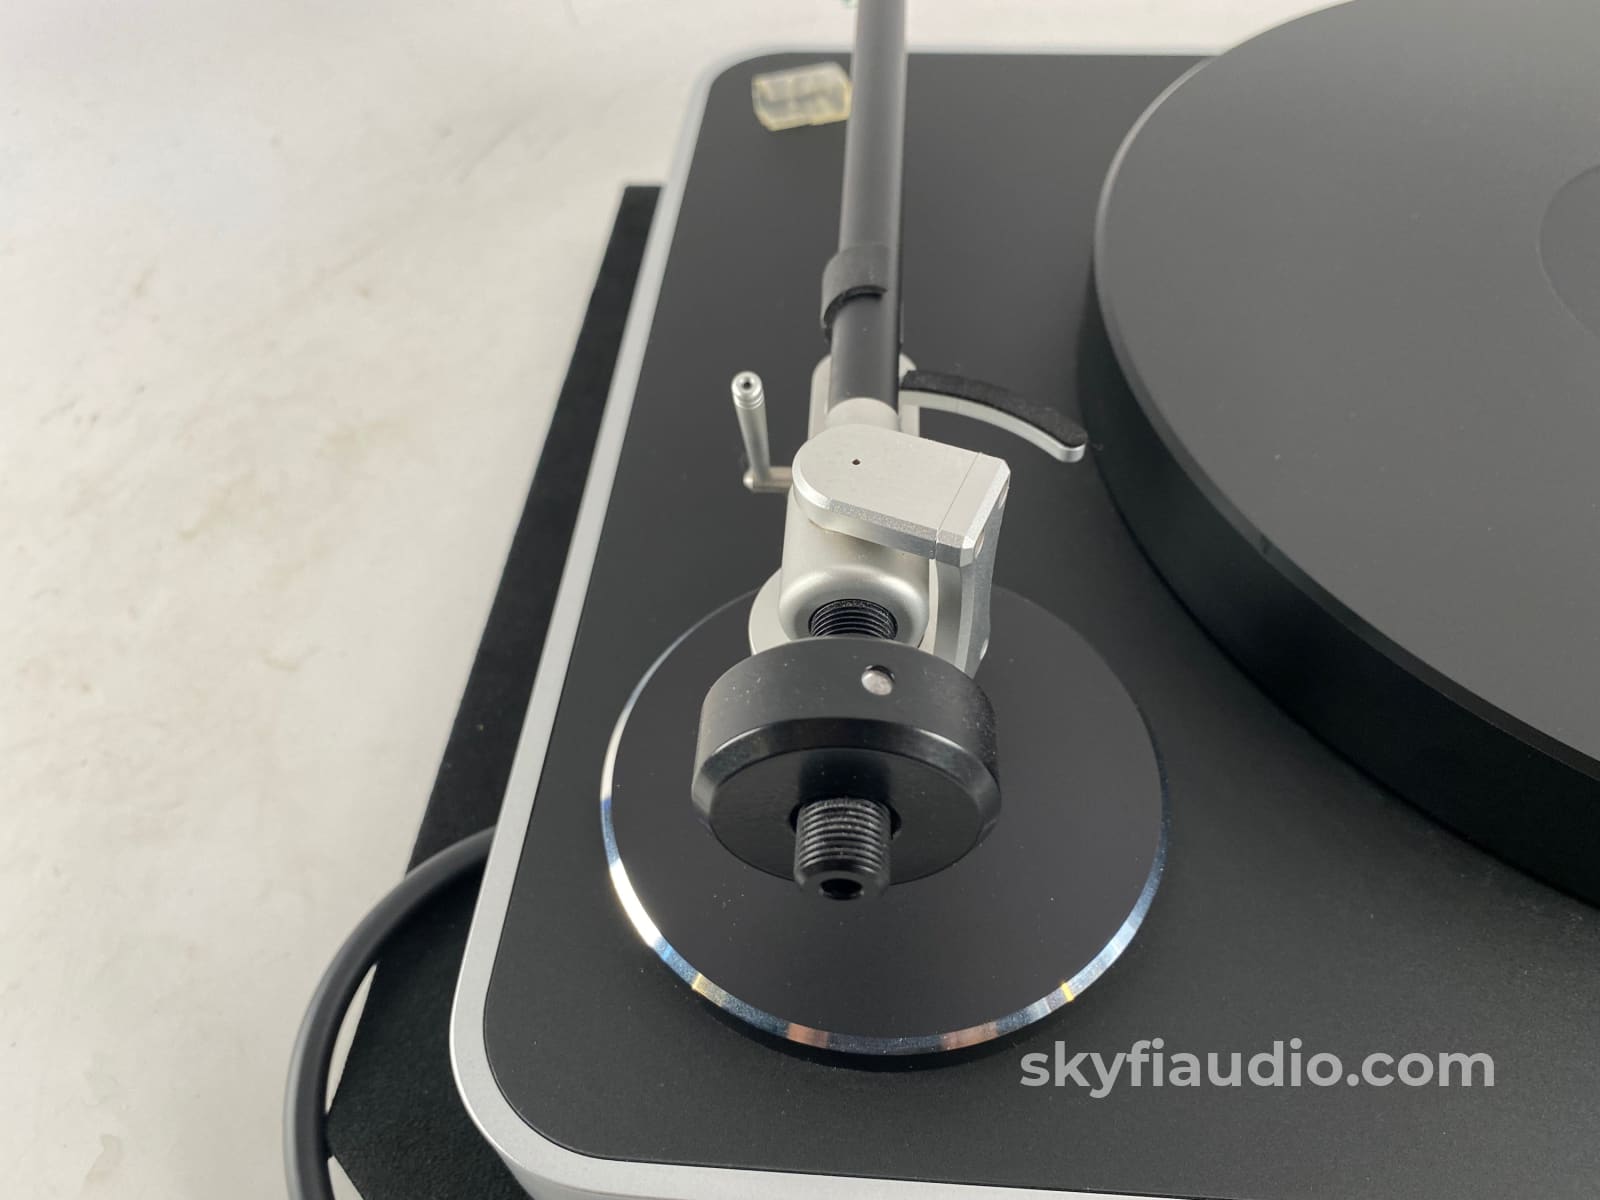 Clearaudio Concept Turntable With Upgraded Virtuoso Phono Cartridge